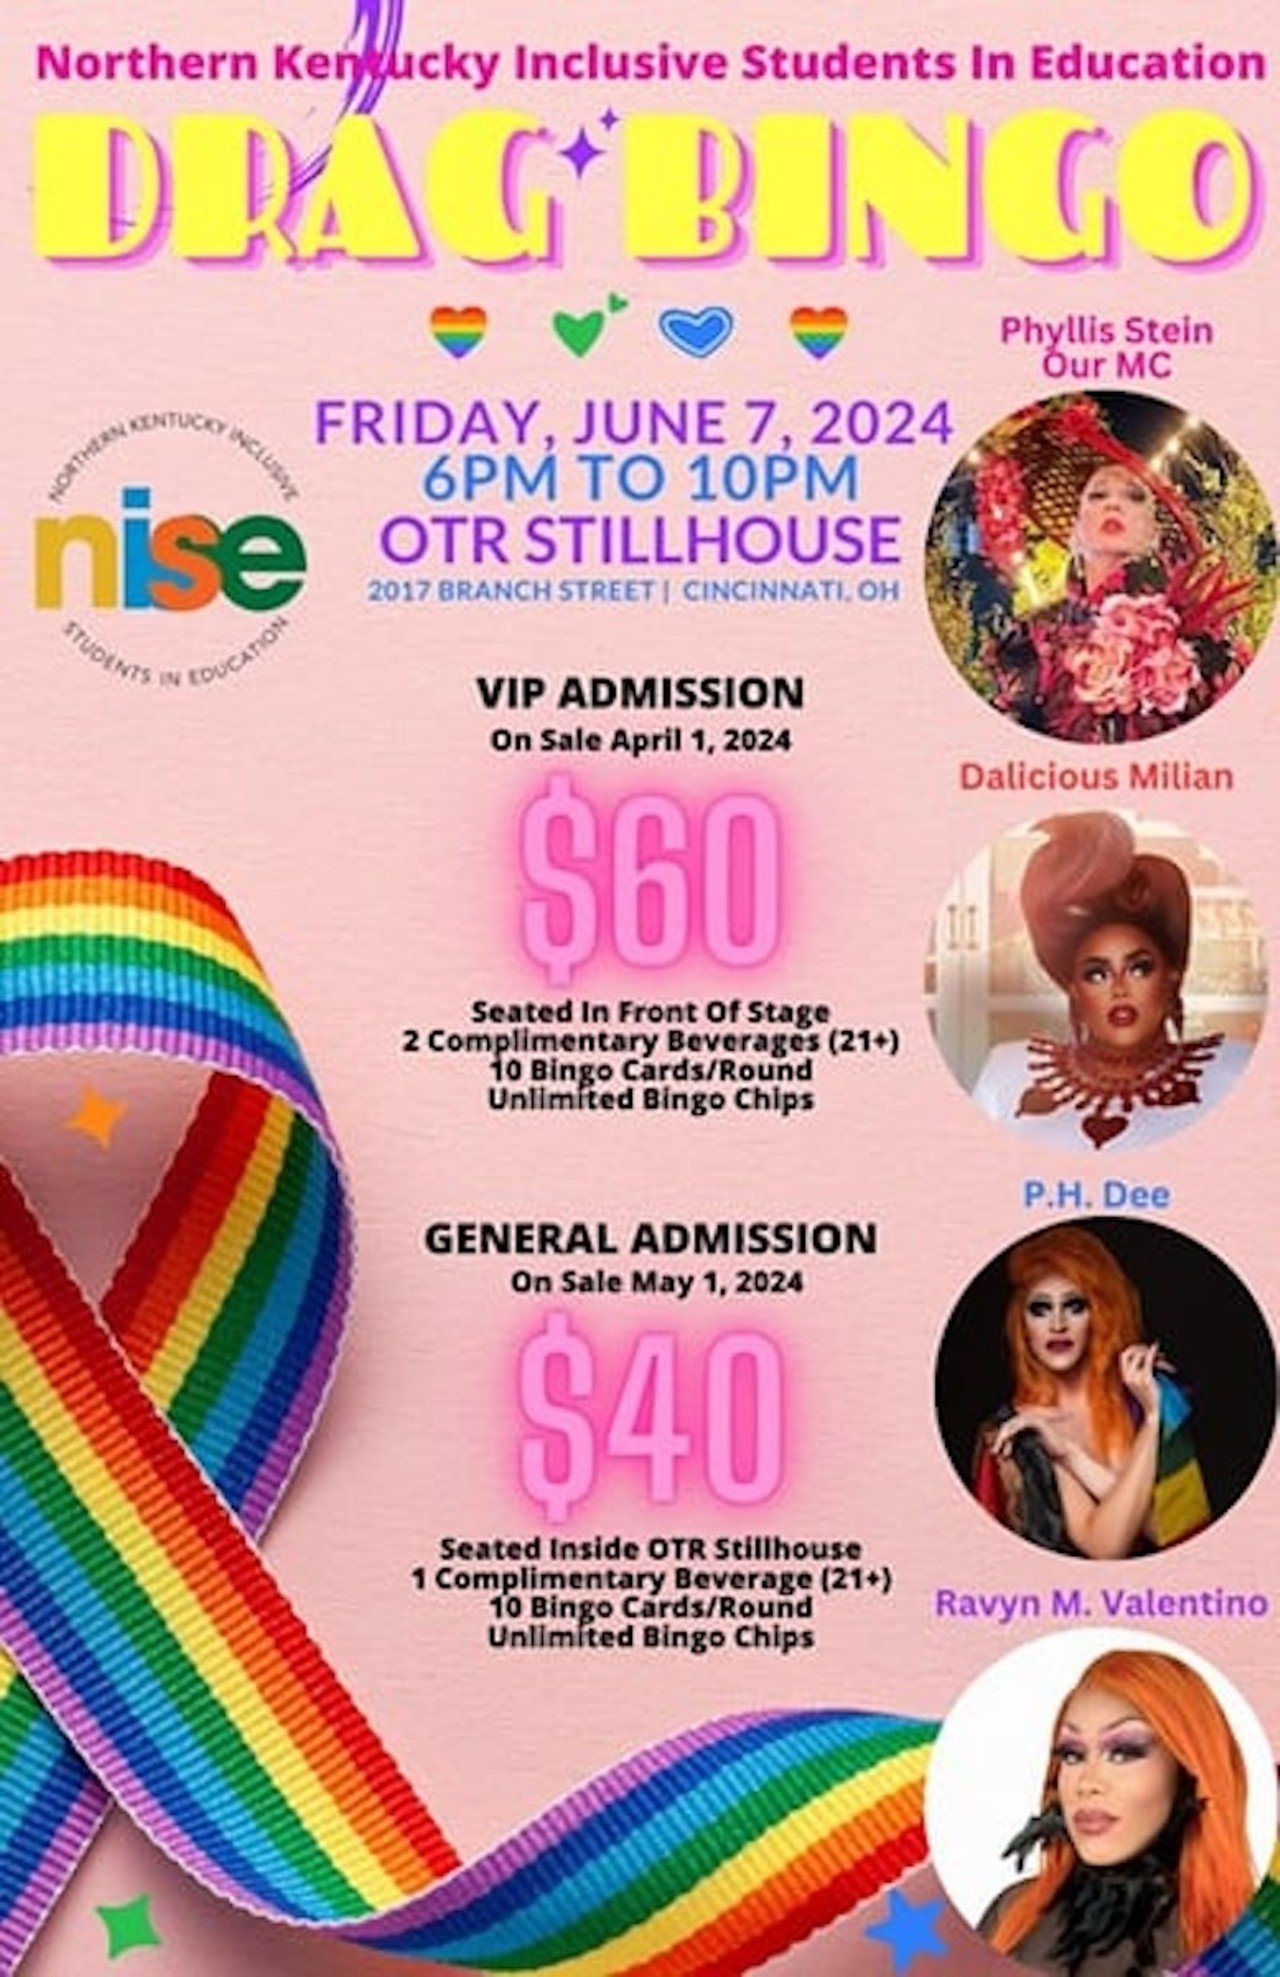 NISE Drag Bingo
When: June 7 from 7-10 p.m.
Where: OTR Stillhouse, Over-the-Rhine
What: The third-annual Drag Bingo fundraiser offers a fun game night for those 18 and older.
Who: Northern Kentucky Inclusive Students in Education
Why: Join local nonprofit Northern Kentucky Inclusive Students in Education for their third-annual Drag Bingo fundraiser to help raise money to promote Diversity, Equity and Inclusion for college and college readiness.